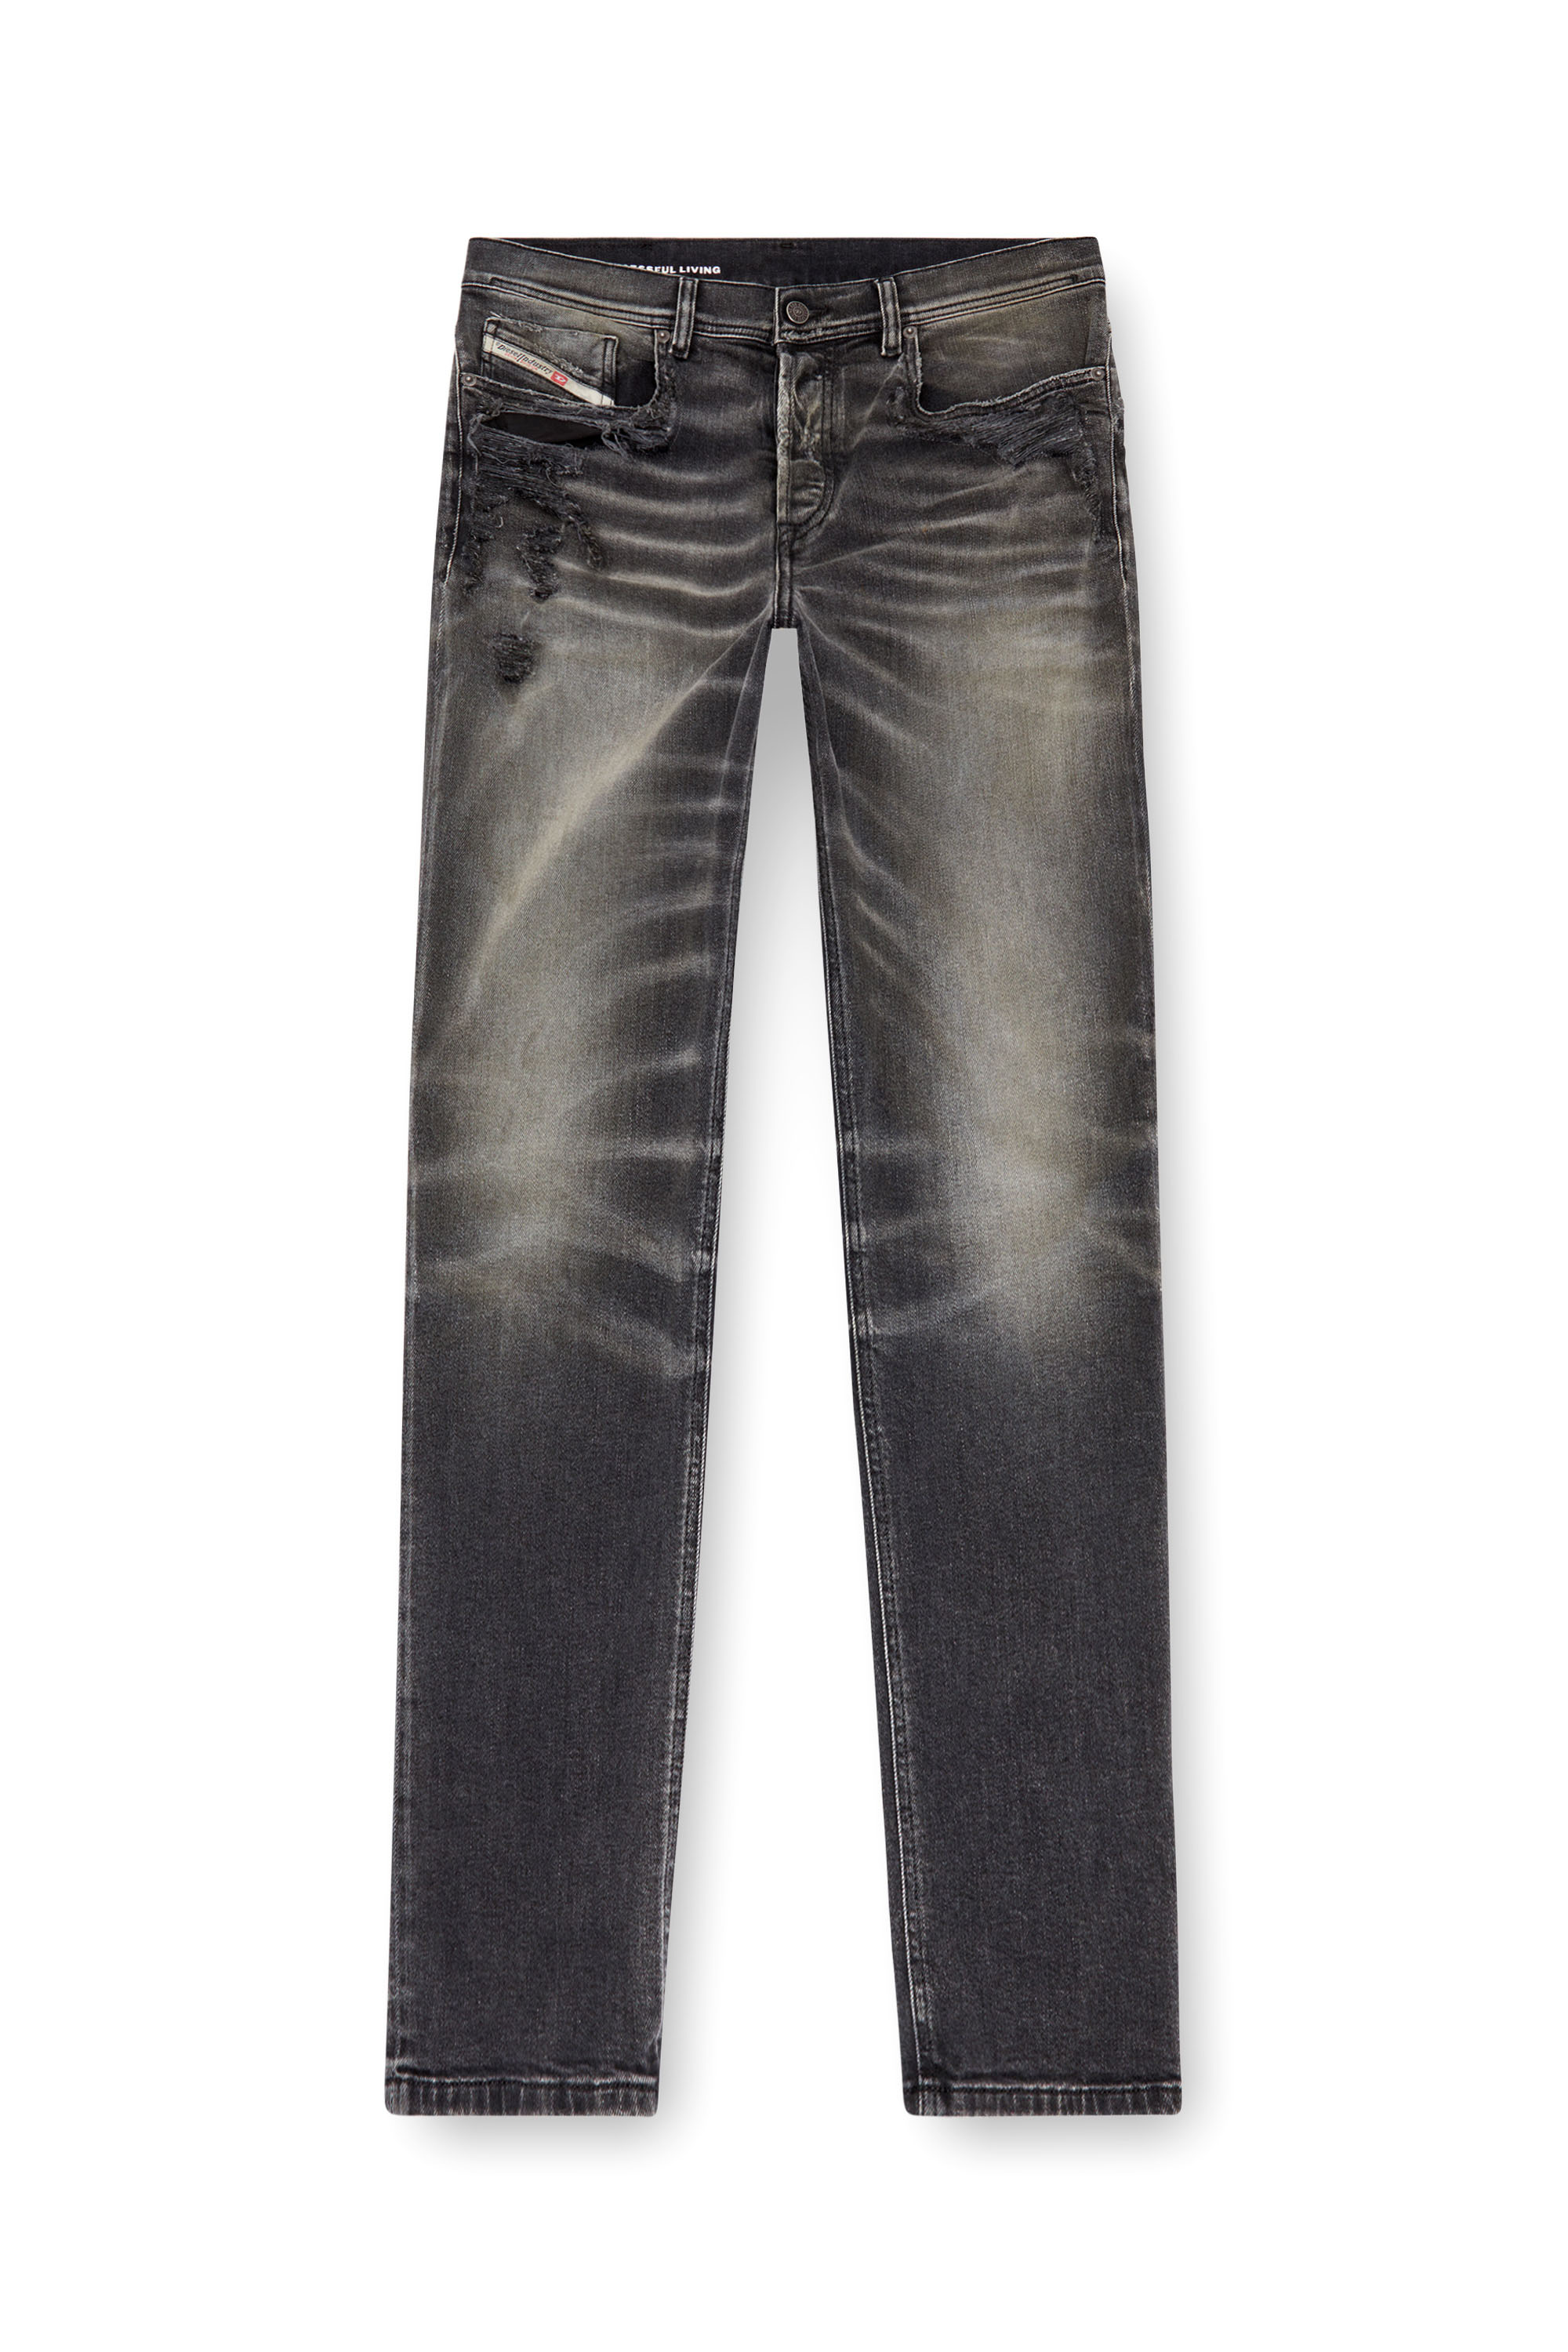 Diesel - Tapered Jeans 2023 D-Finitive 09K25, Hombre Tapered Jeans - 2023 D-Finitive in Negro - Image 5